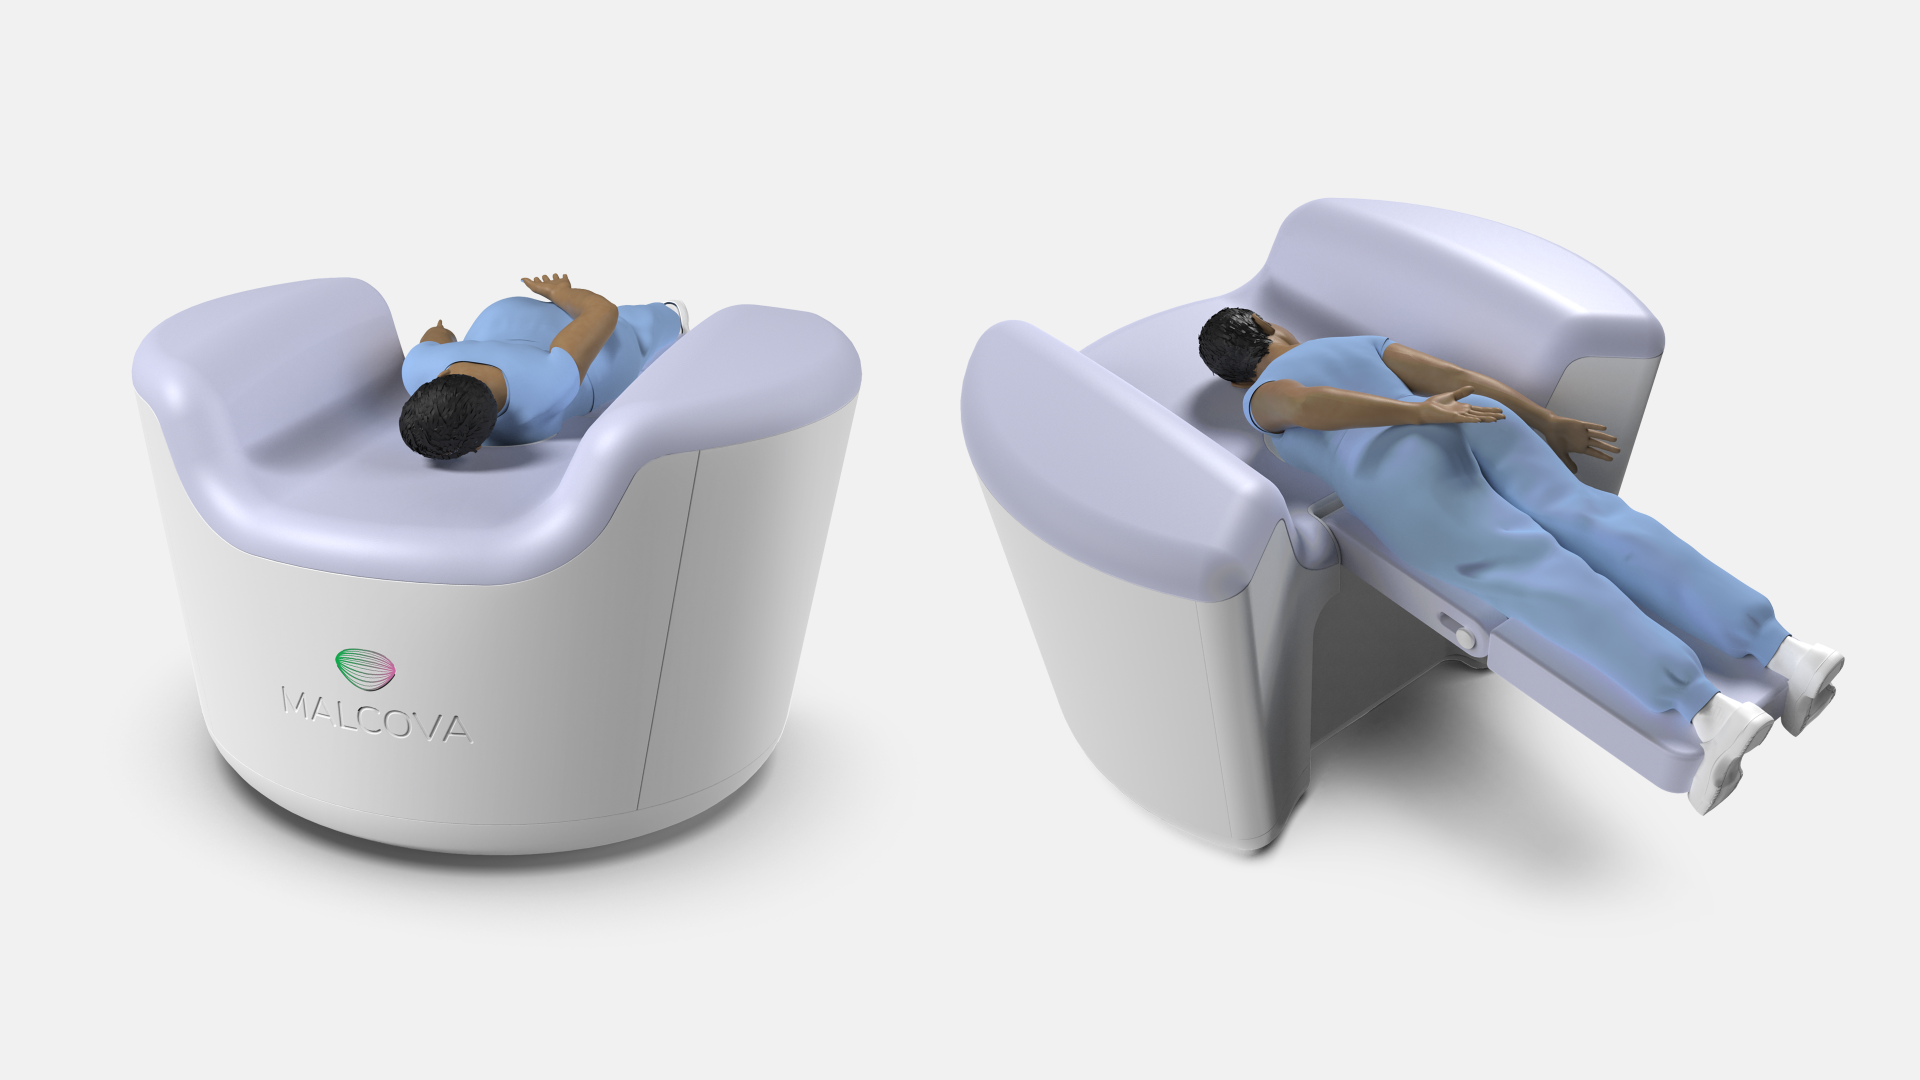 Two 3d renderings of a person lying in Malcova's innovative new breast imaging system, one view is front three-quarter the other view is top overhead.